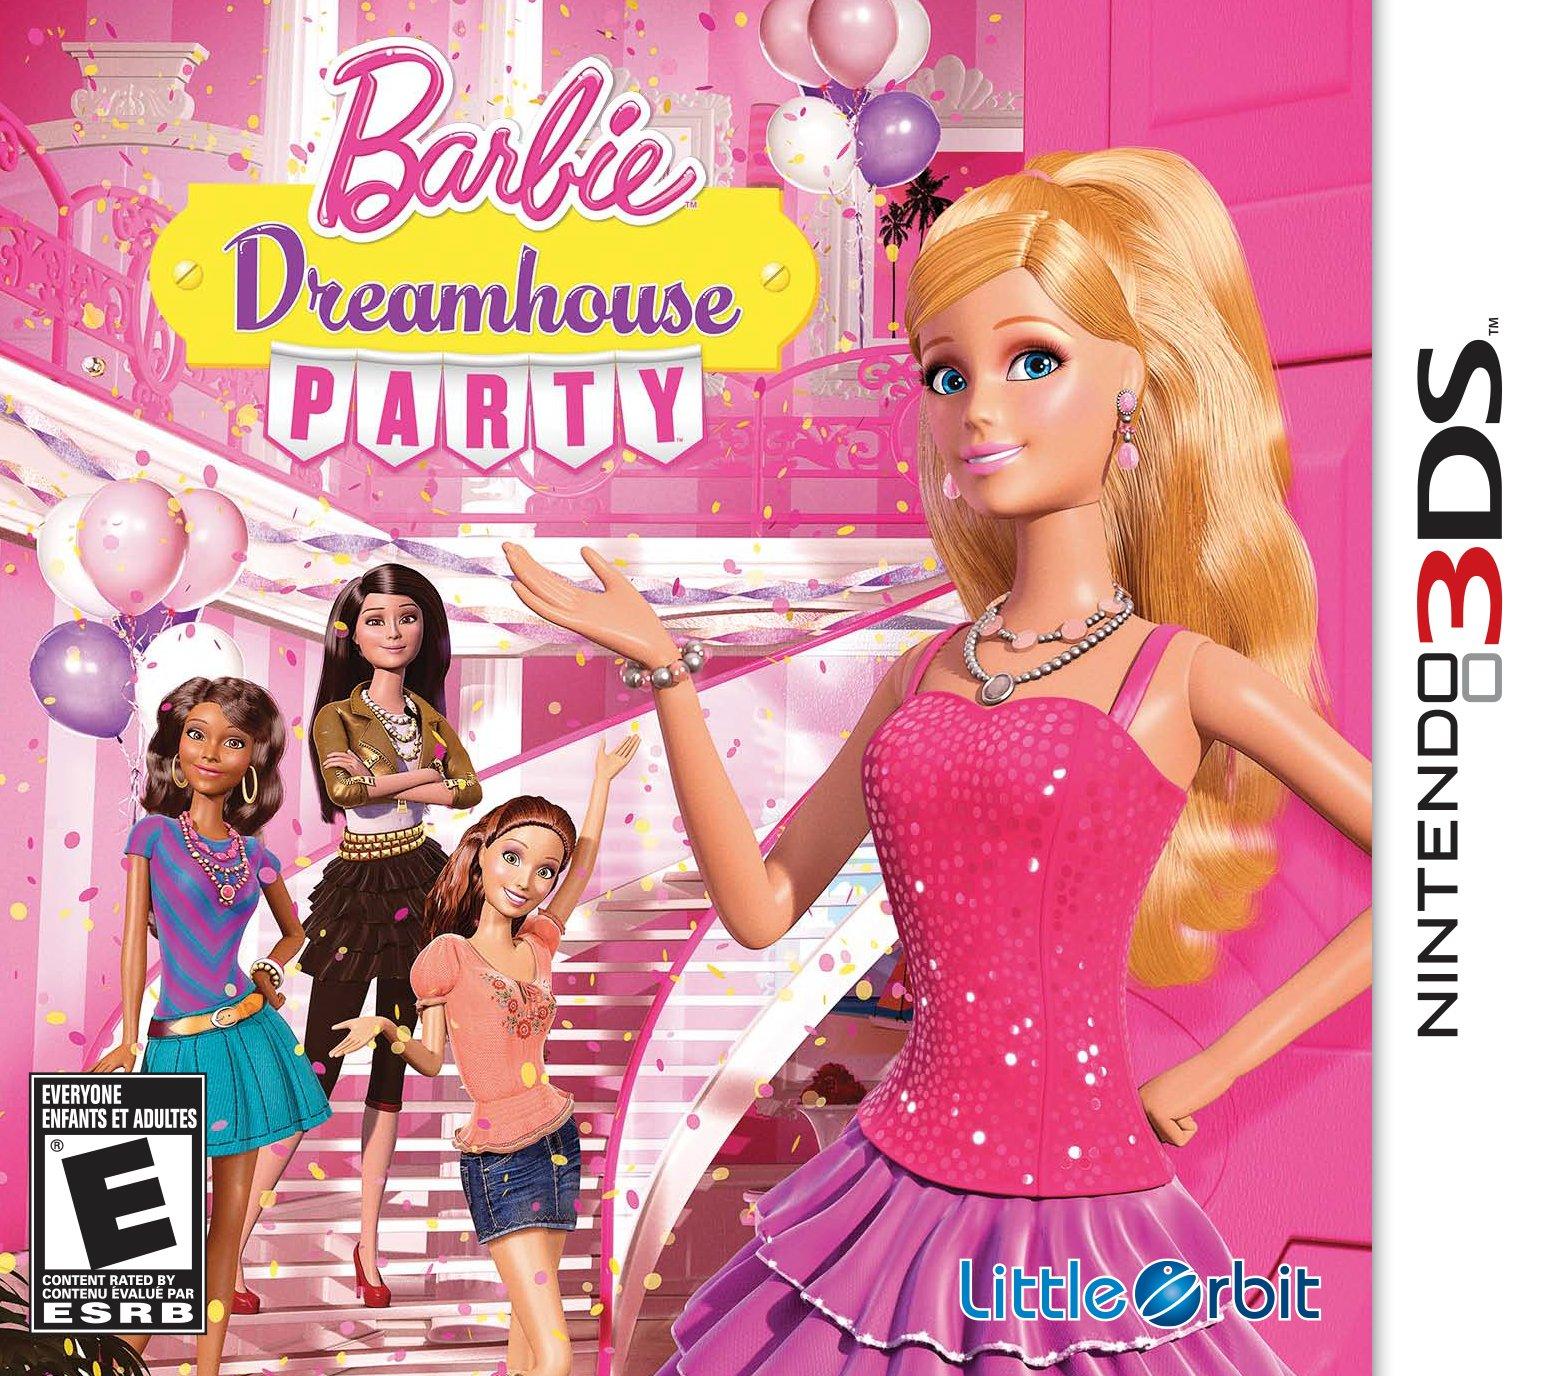 barbie games with levels